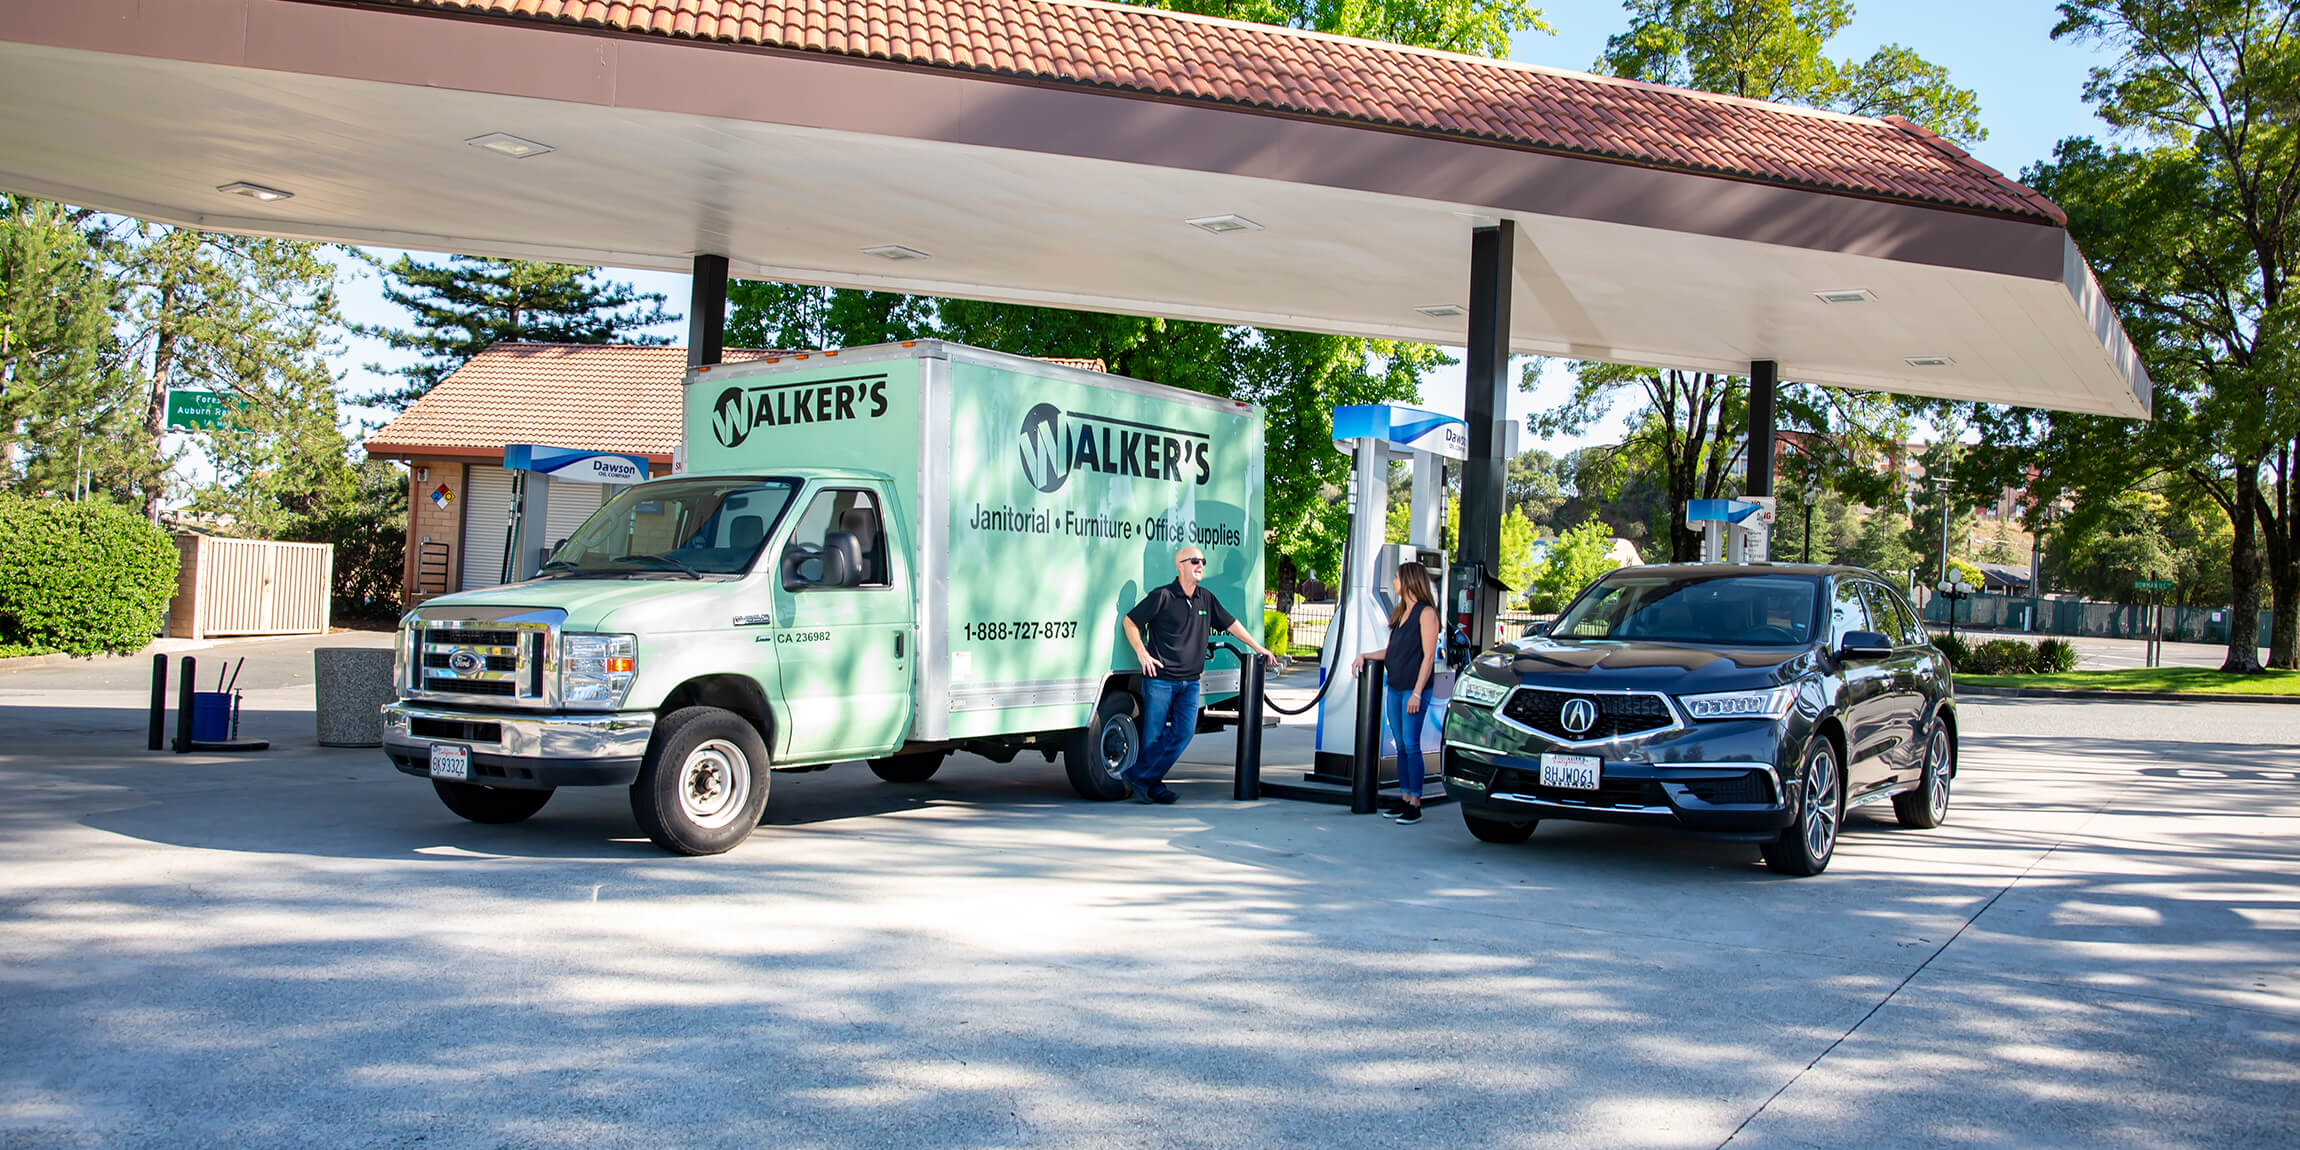 Designed with our customers' needs in mind, our fueling stations are clean, safe, well-lit, and spacious. Trailers and Airstreams welcome.